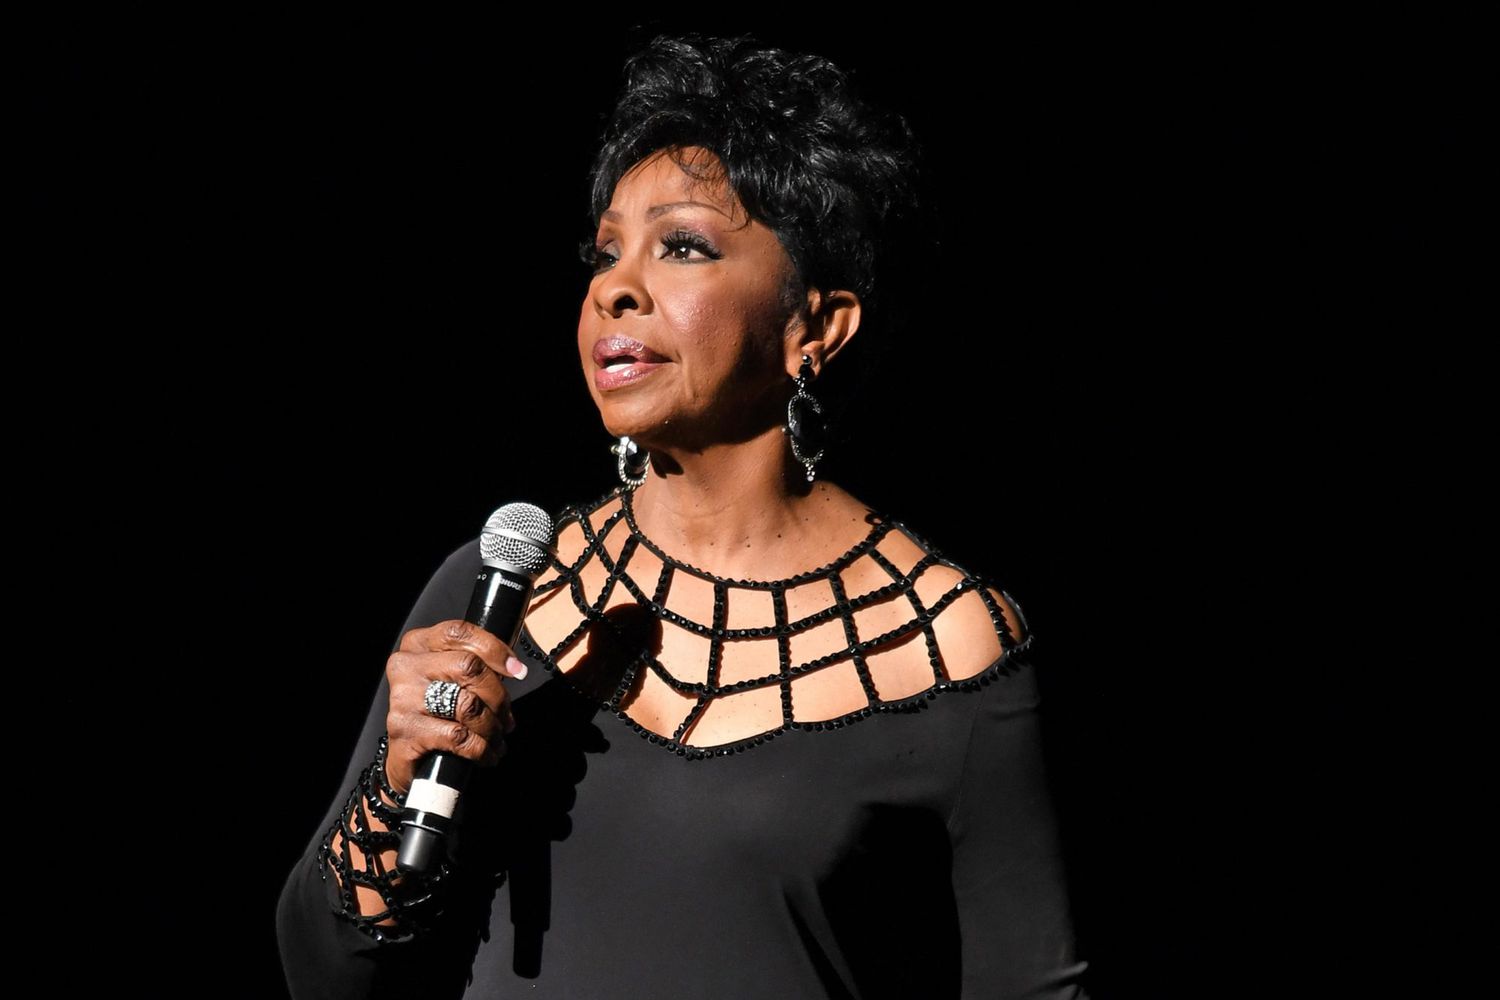 Gladys Knight in concert at The Broward Center, Fort Lauderdale, USA - 27 Jan 2017